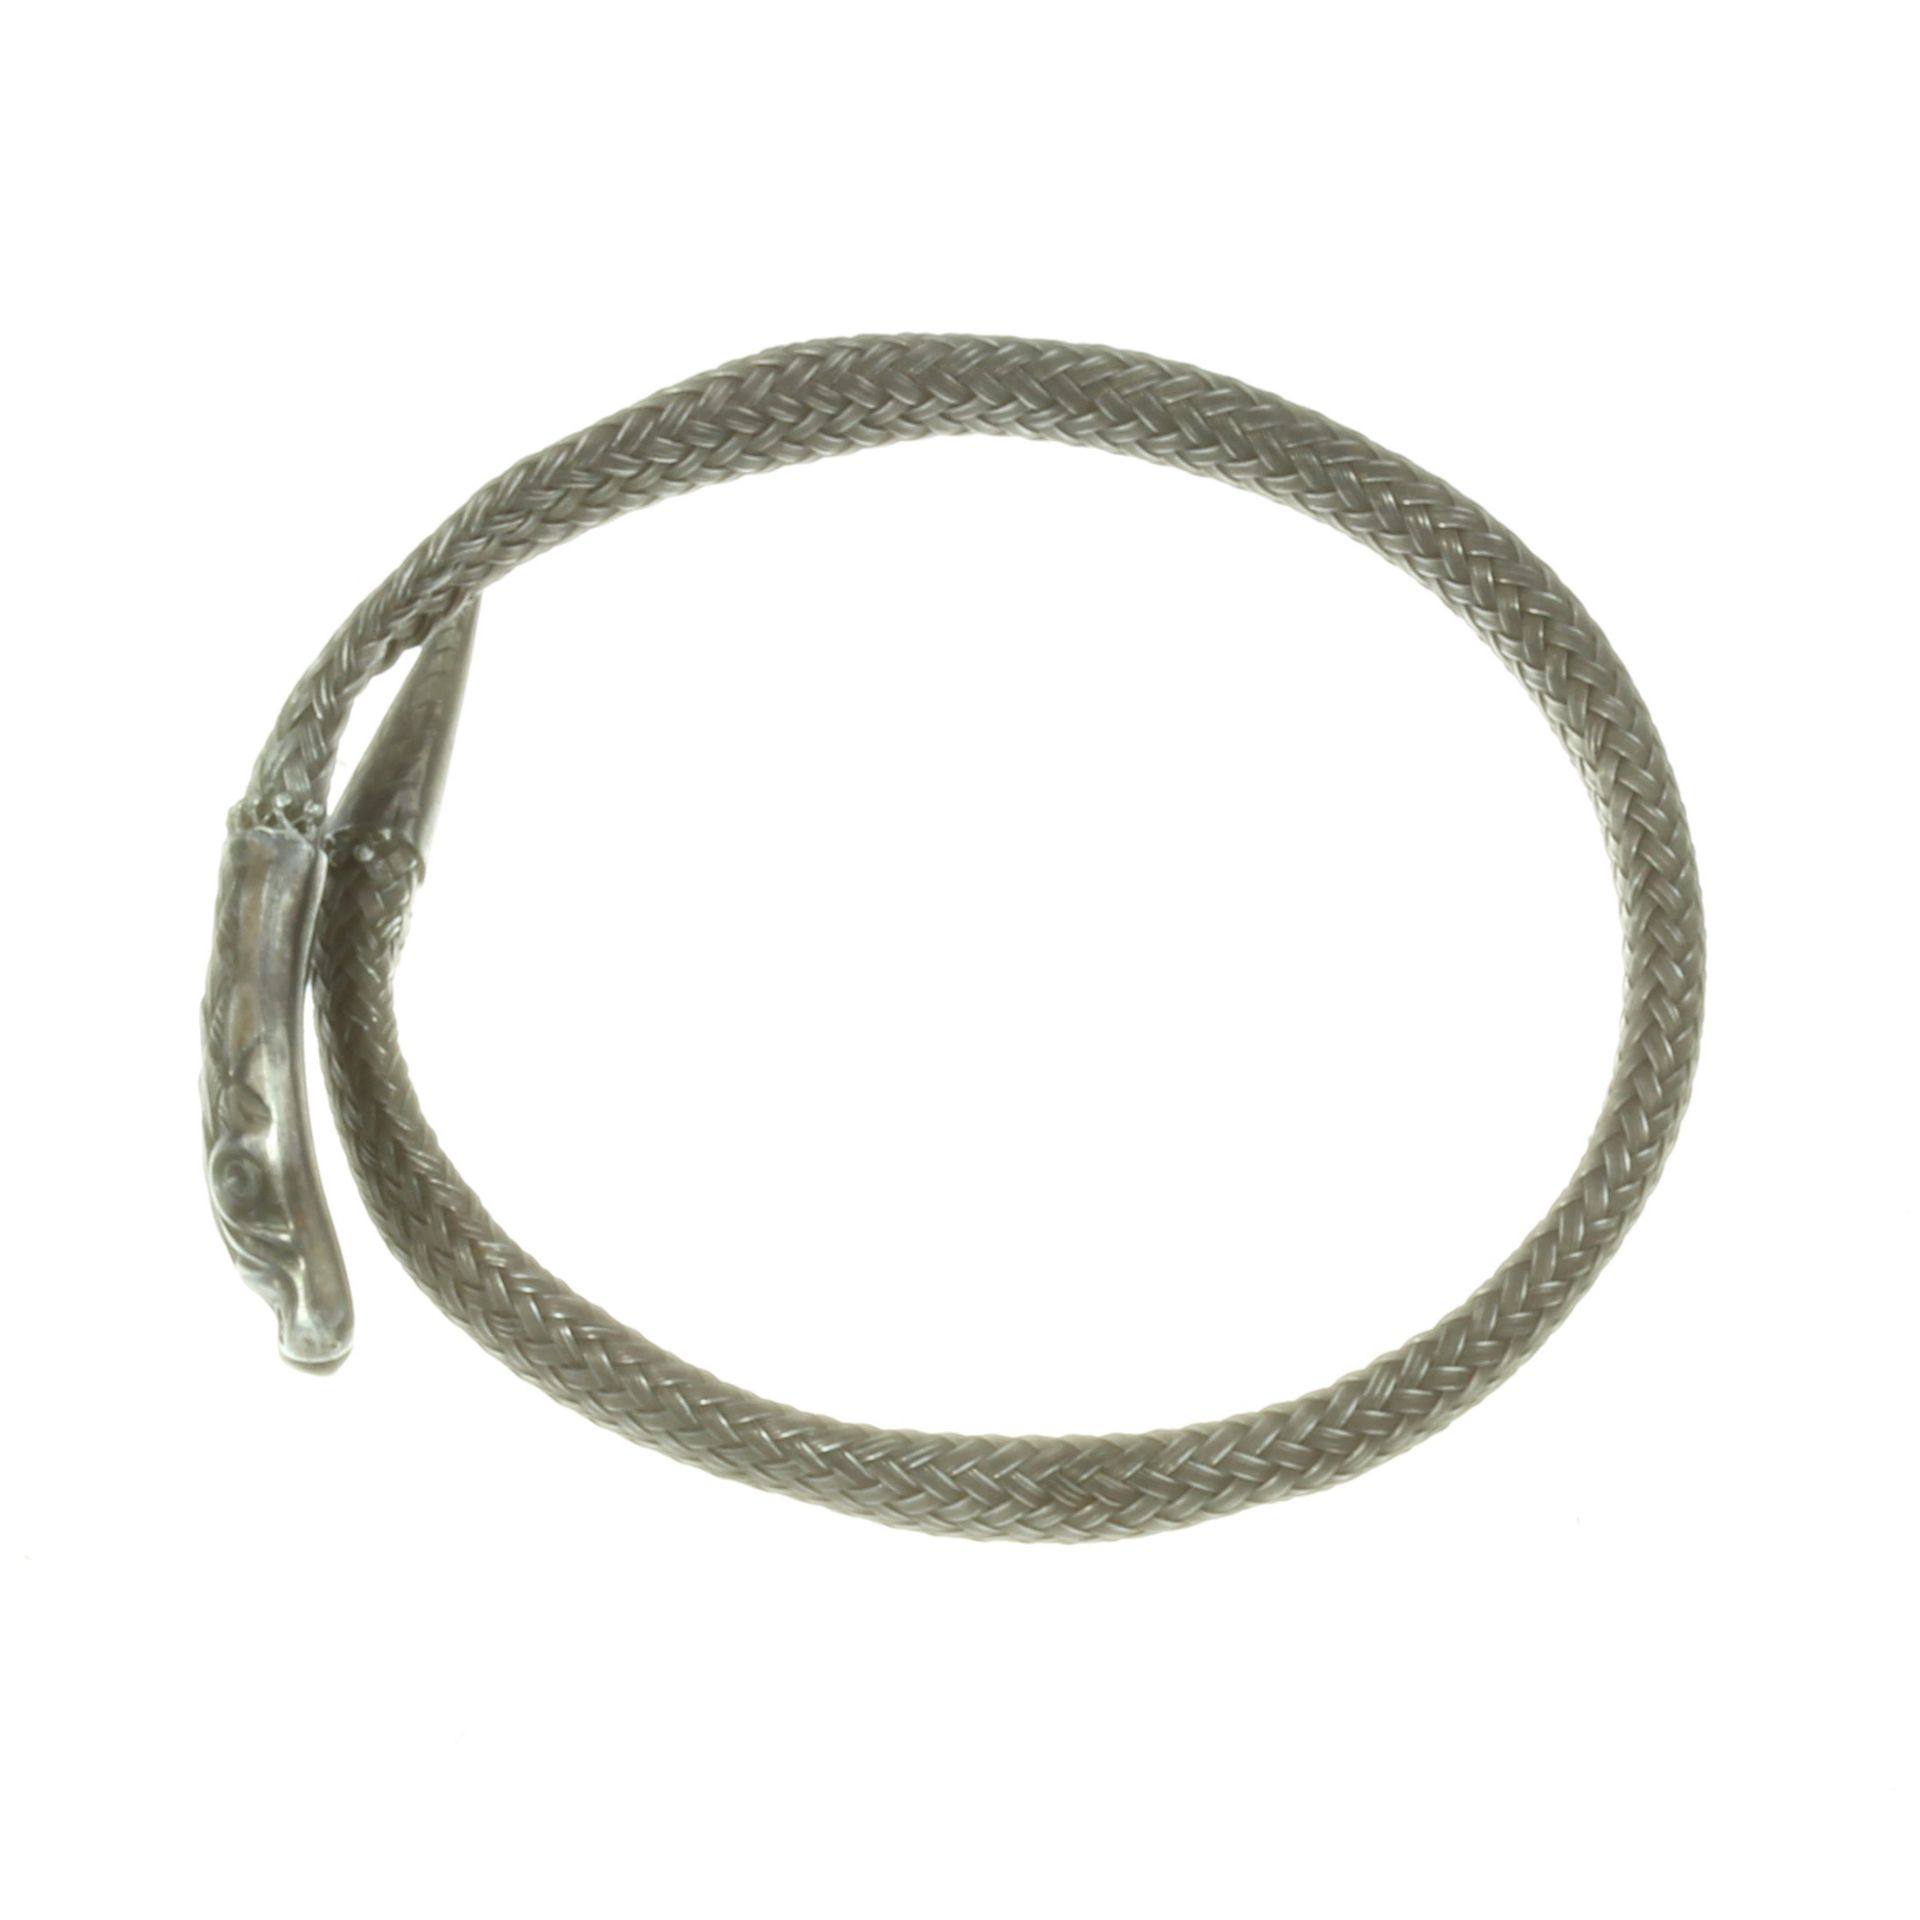 AN ANTIQUE SNAKE BRACELET / BANGLE in silver, designed as the body of a serpent coiled around